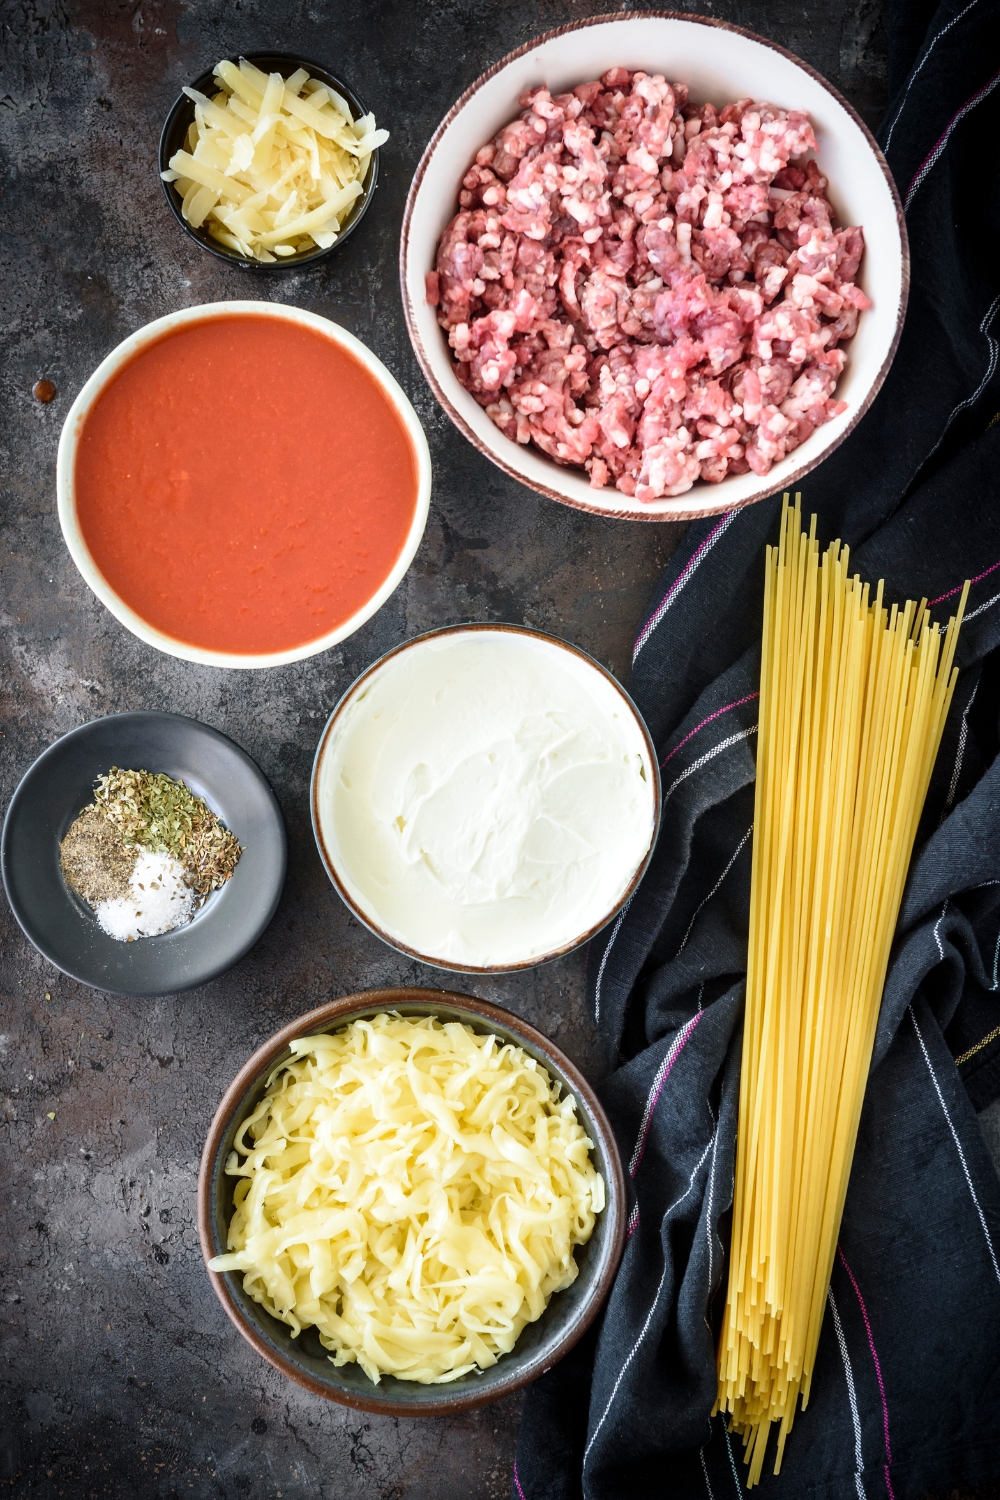 An assortment of ingredients including bowls of raw ground beef, pasta sauce, cream cheese, shredded cheese, spices, and a bundle of dried spaghetti noodles.